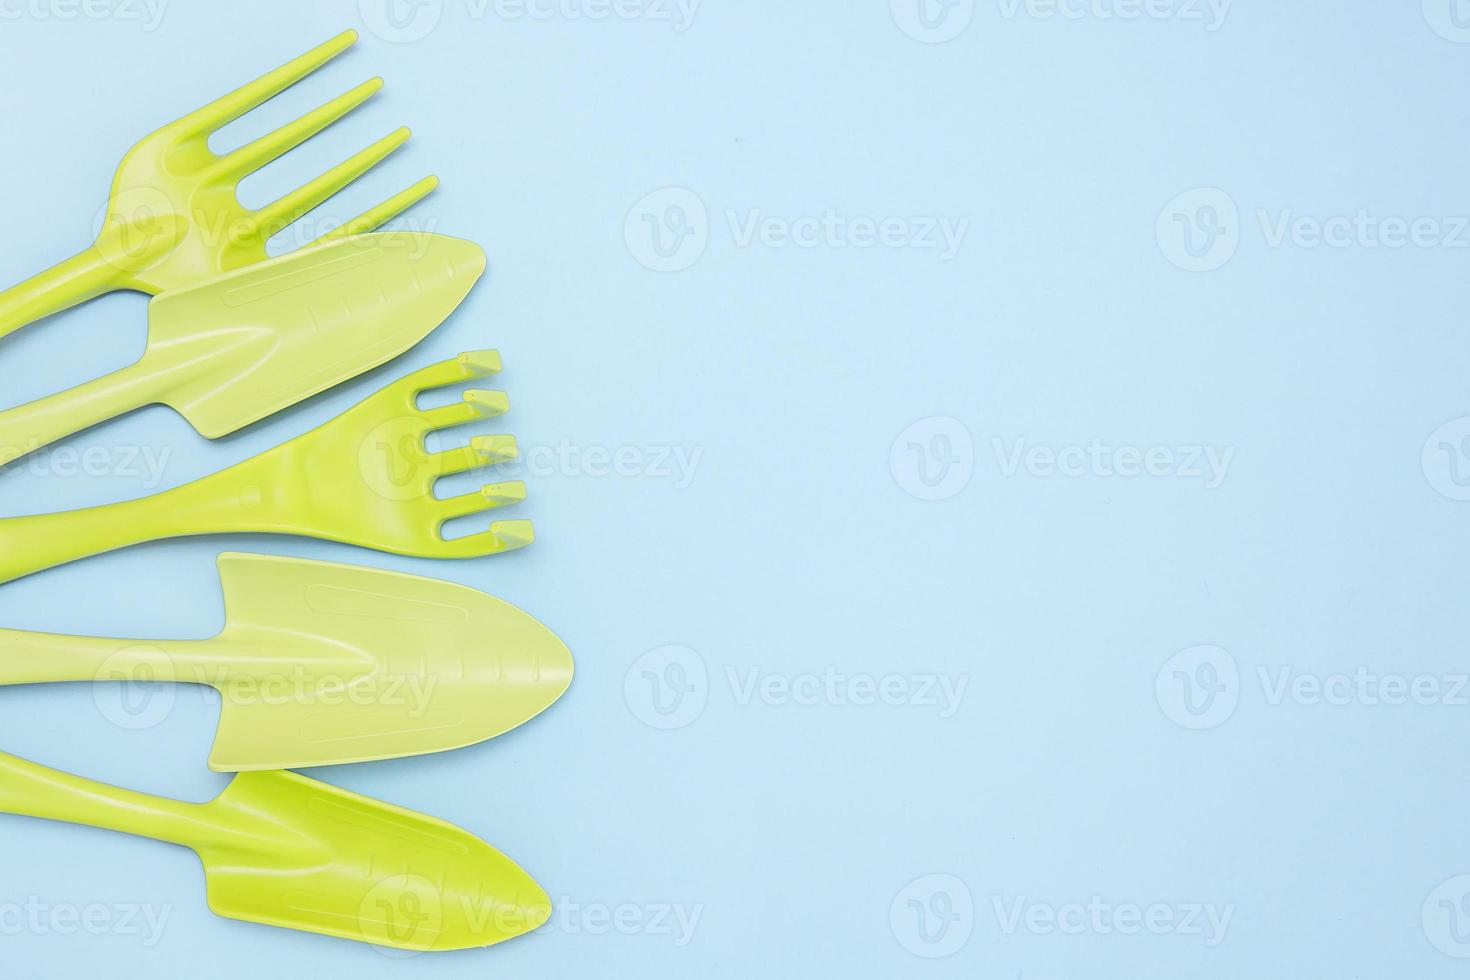 tools for gardening and floriculture, rakes, shovels on a blue background with copy space photo